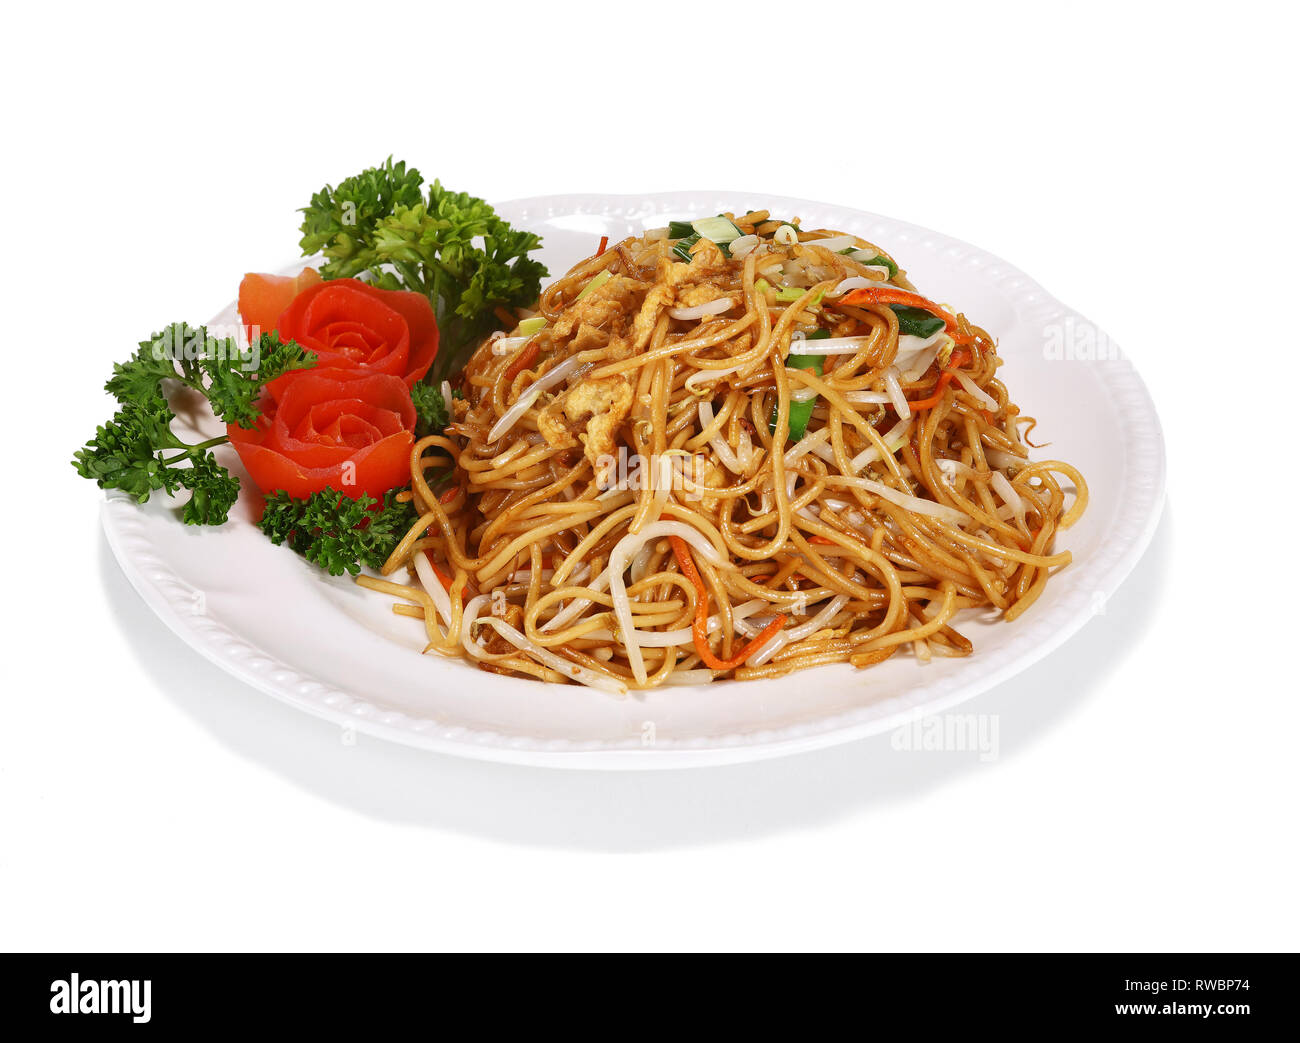 Fried noodles - a typical Asian/Chinese dish. Served on a white plate, garnished with tomatoes and salad. Stock Photo